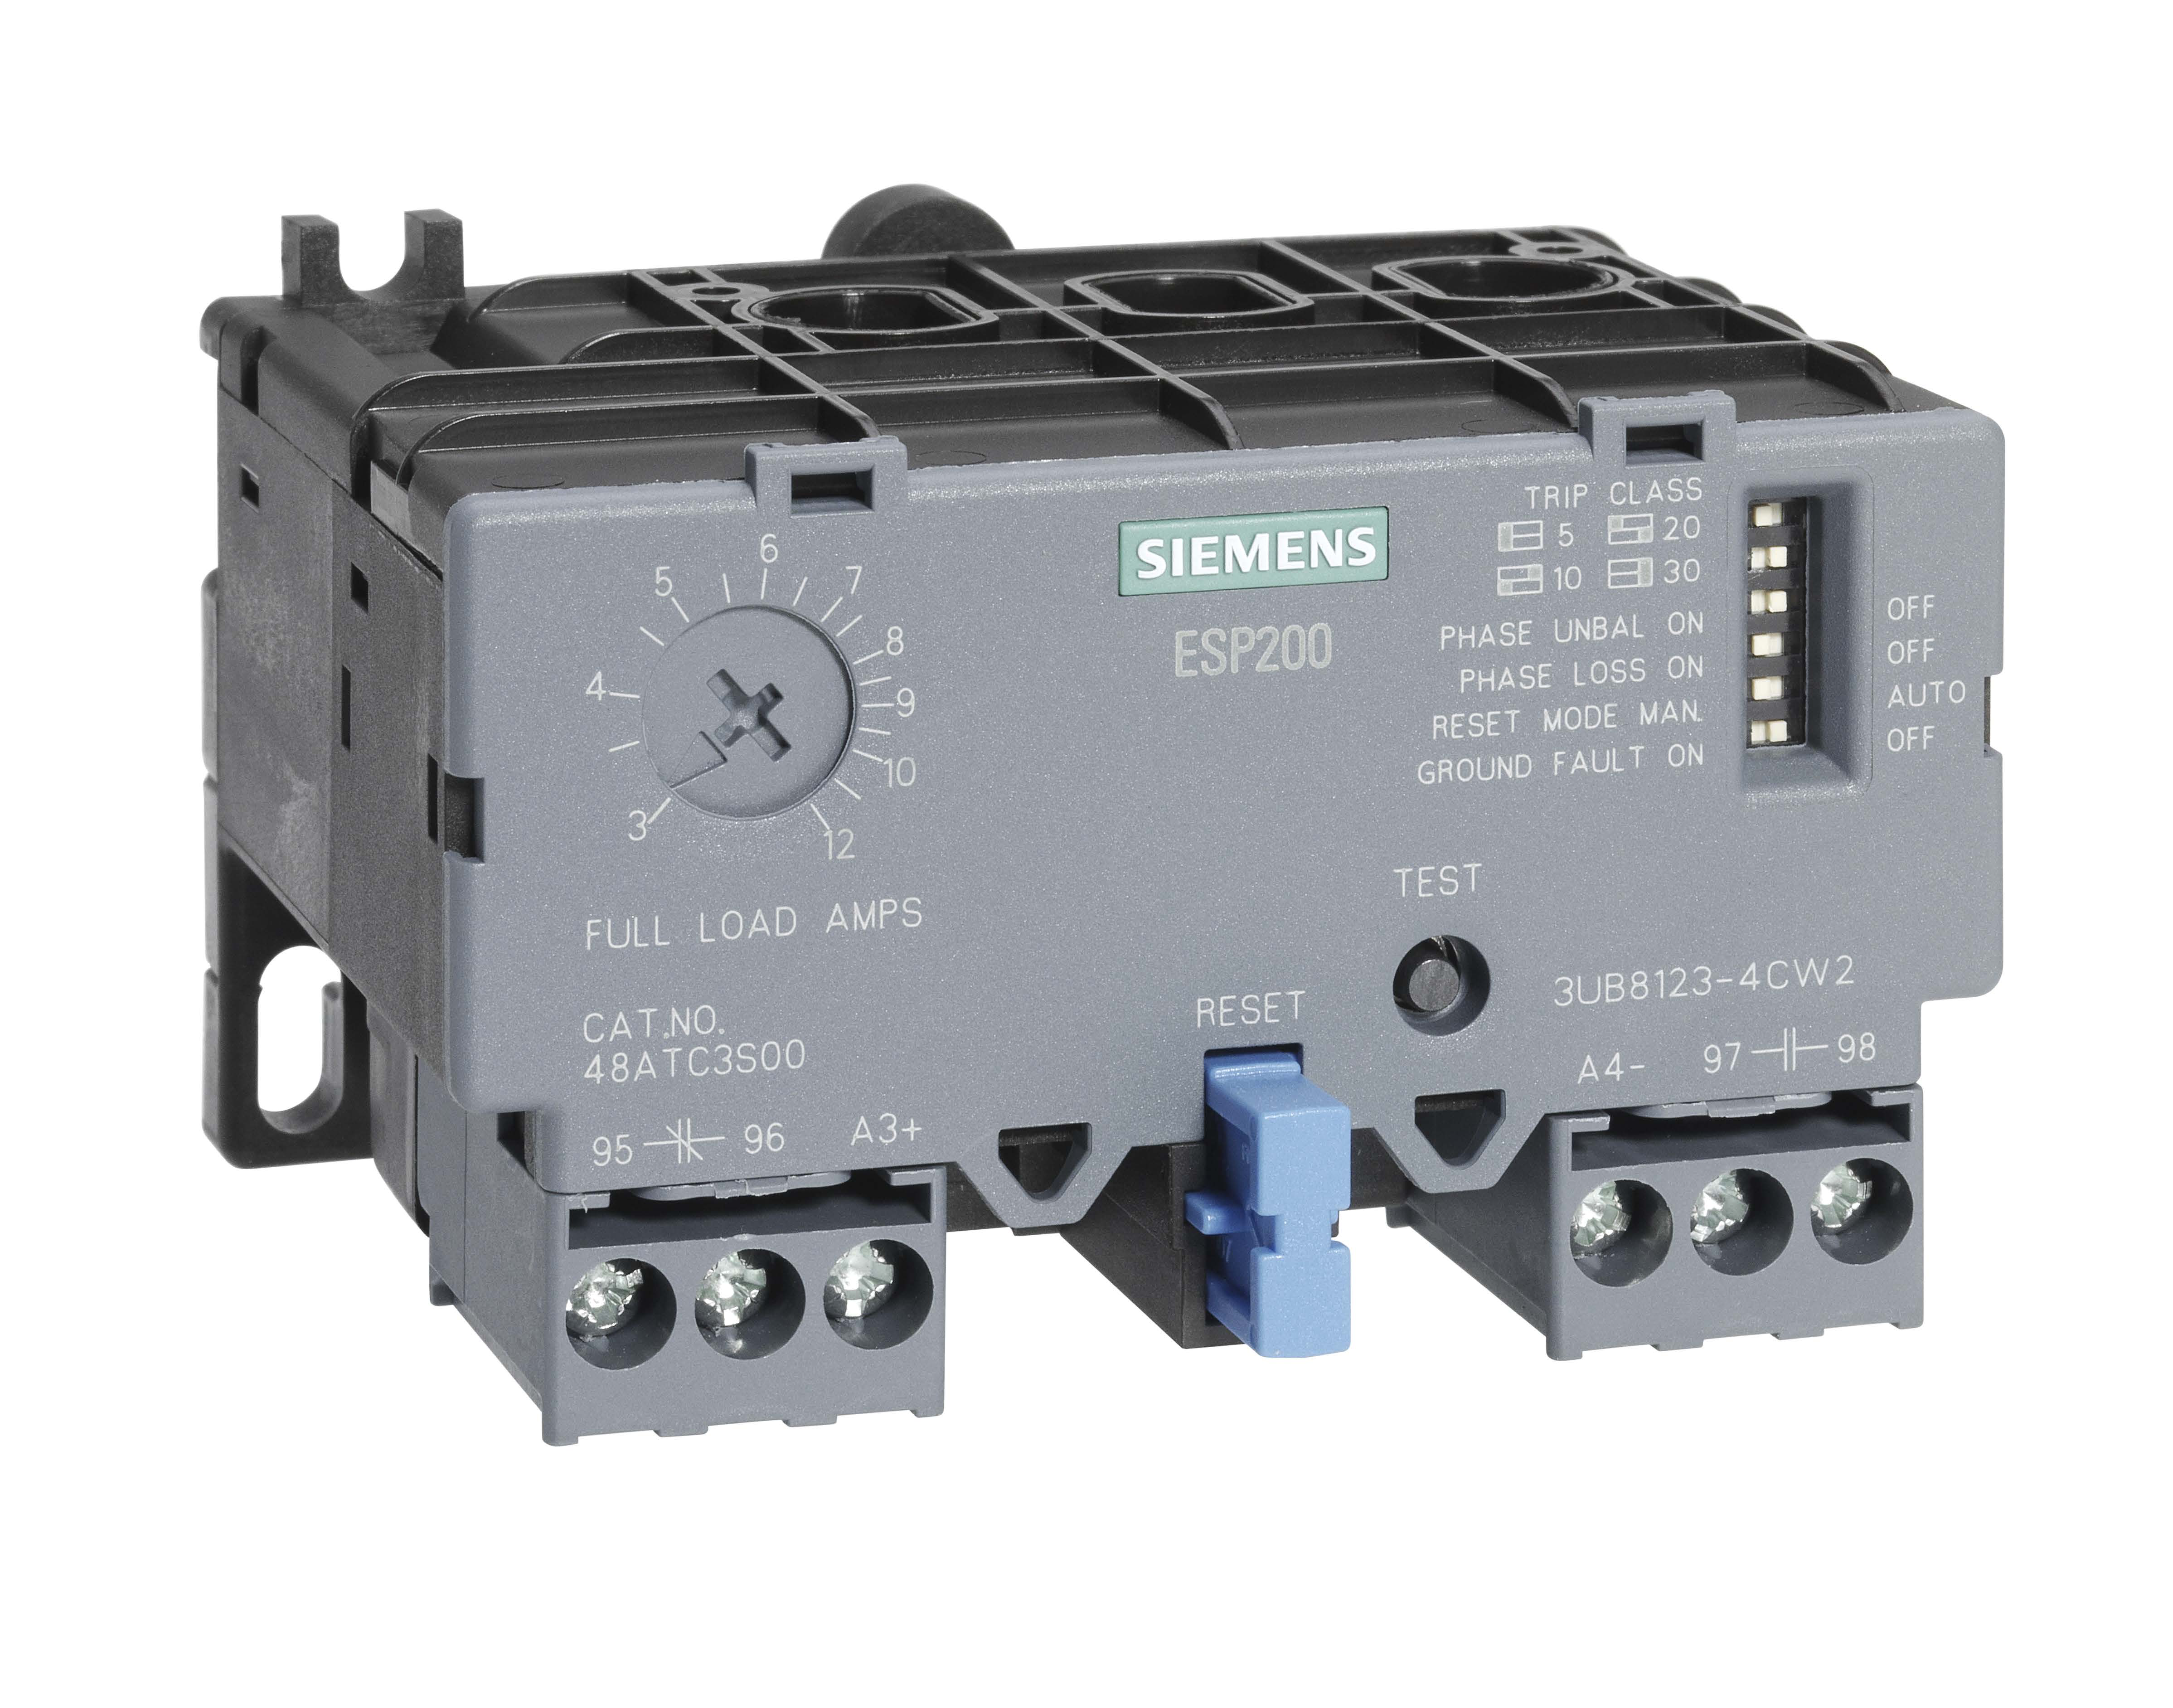 Siemens Controls 3UB81234CW2 3UB81234CW2: Siemens Controls Overload Relay,3-12Amps,3Ph,ESP200 //www.fraserlikely.com/wp-content/uploads/2020/AB_Images/Siemens%20Controls_3UB81234CW2.jpg